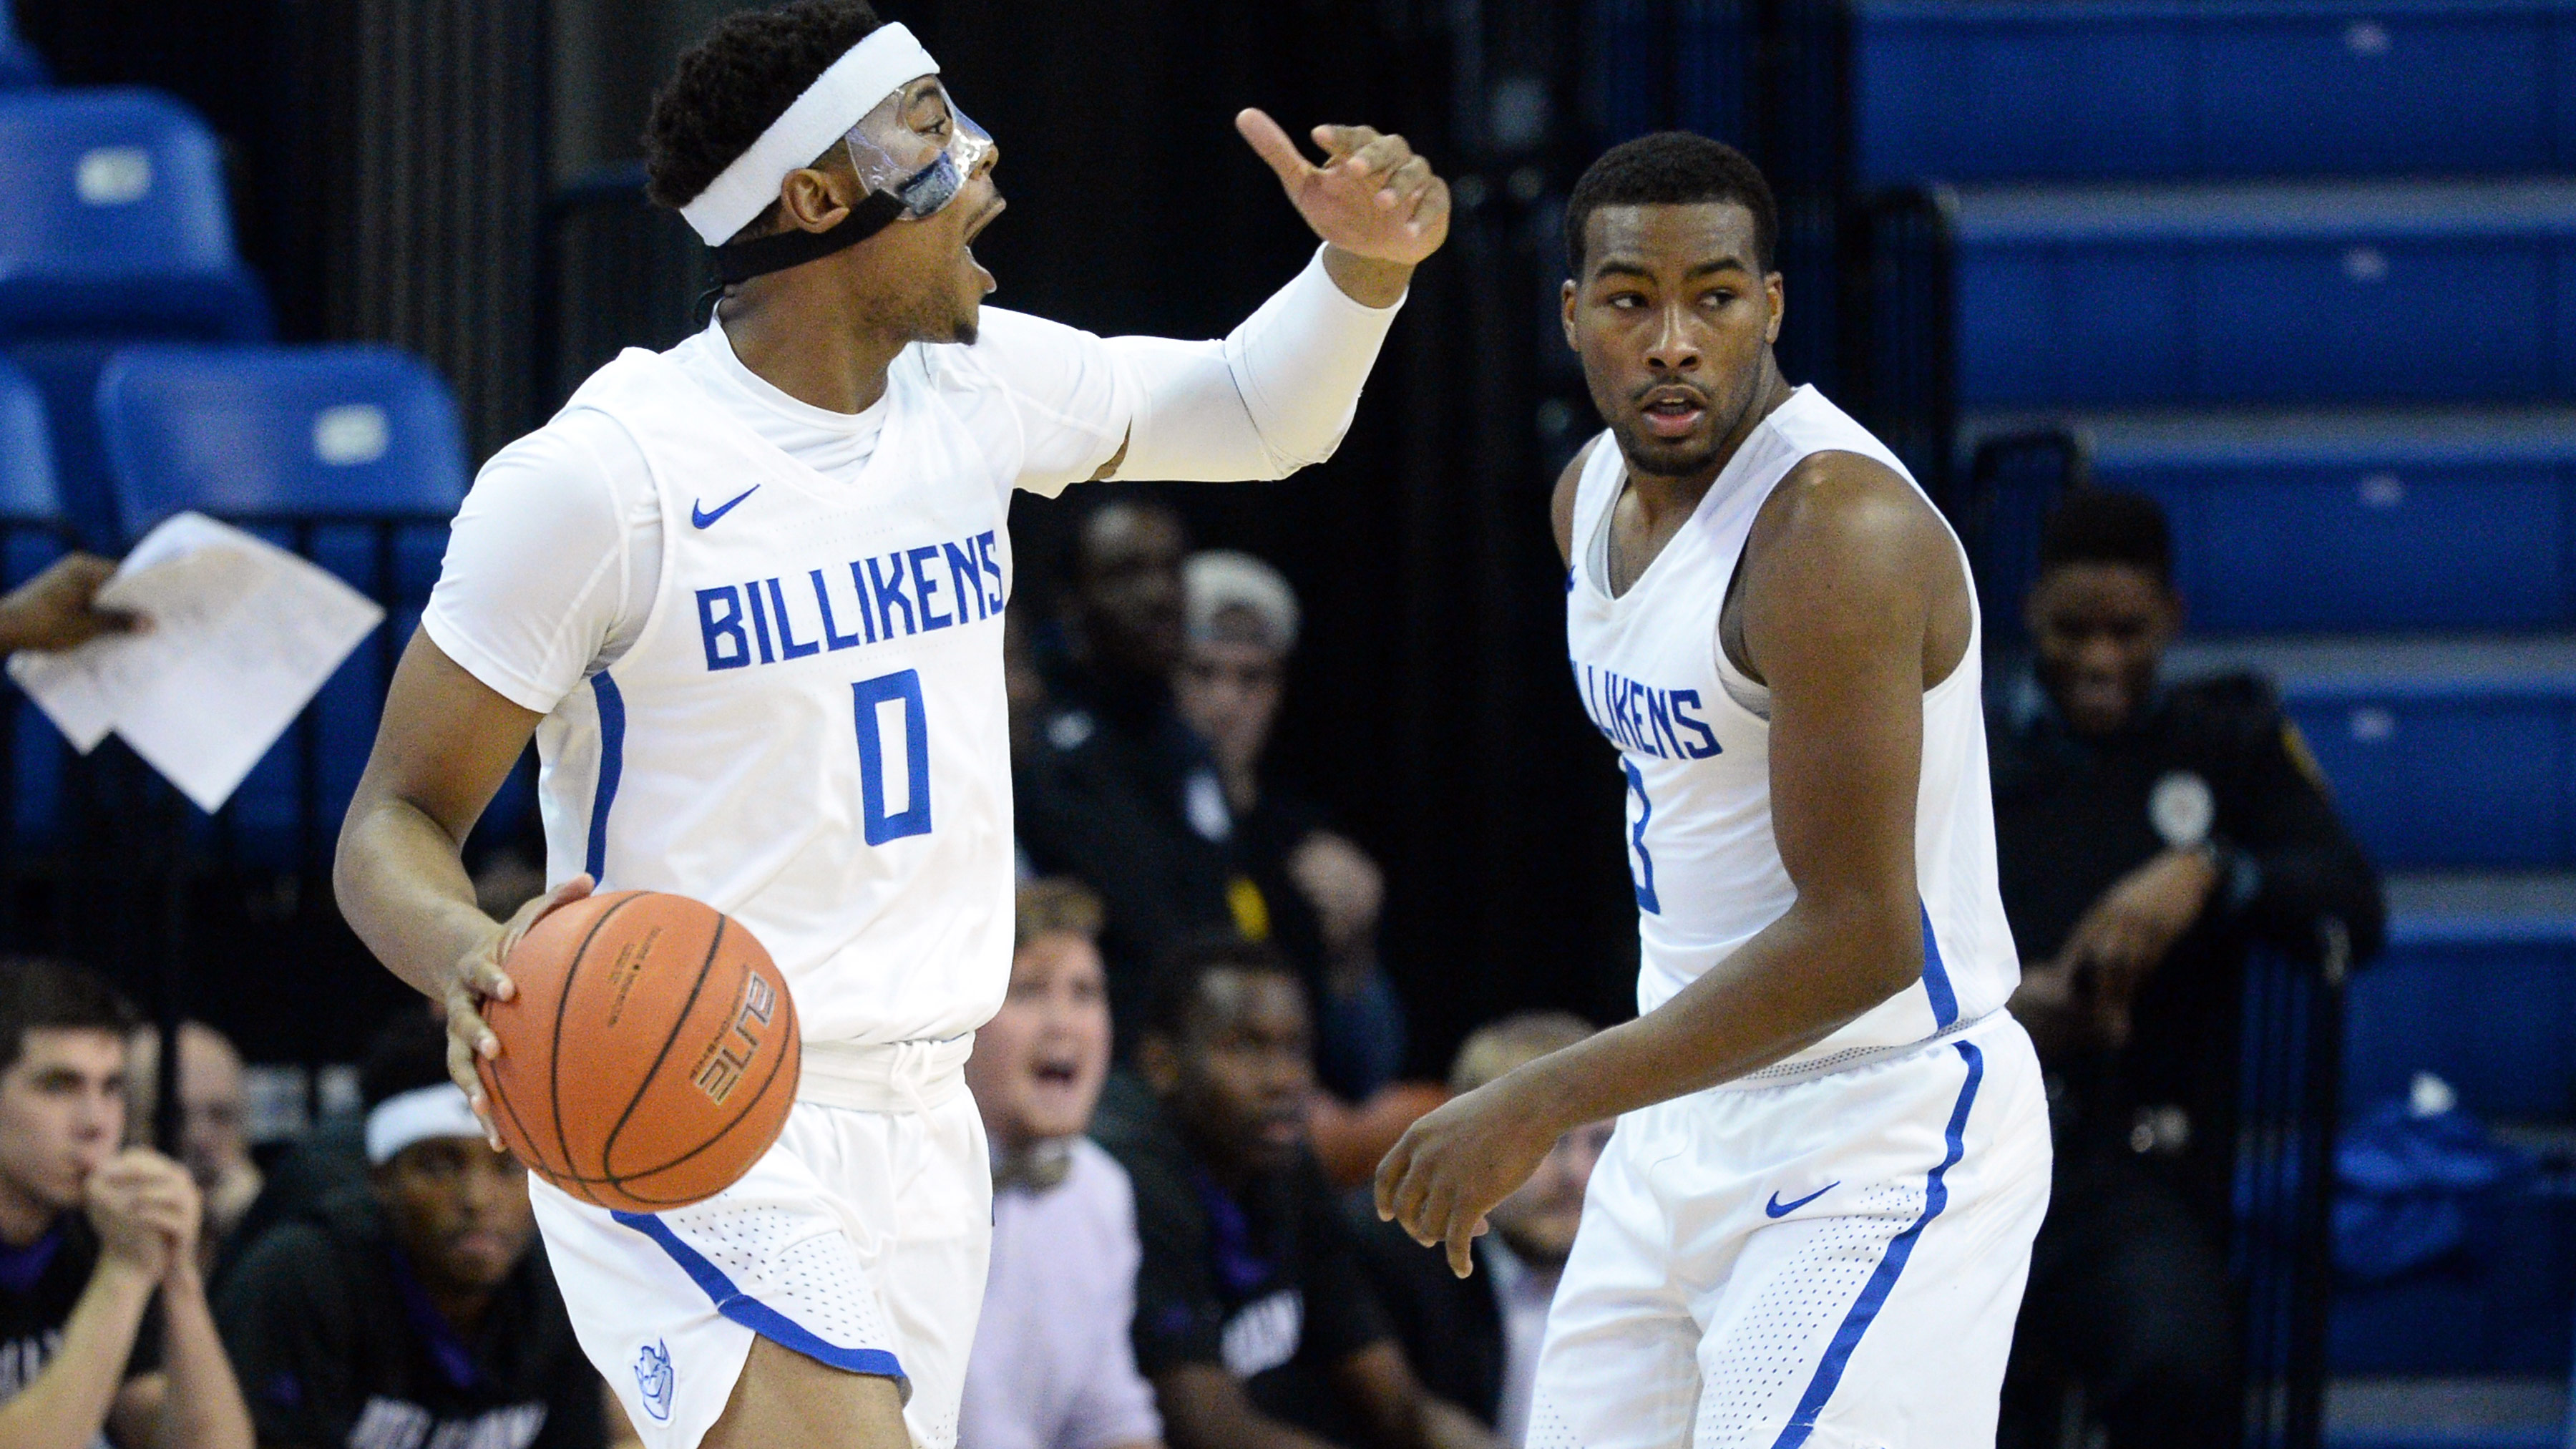 Billikens edged by Pitt for first loss, 75-73 in Barclays Center Classic